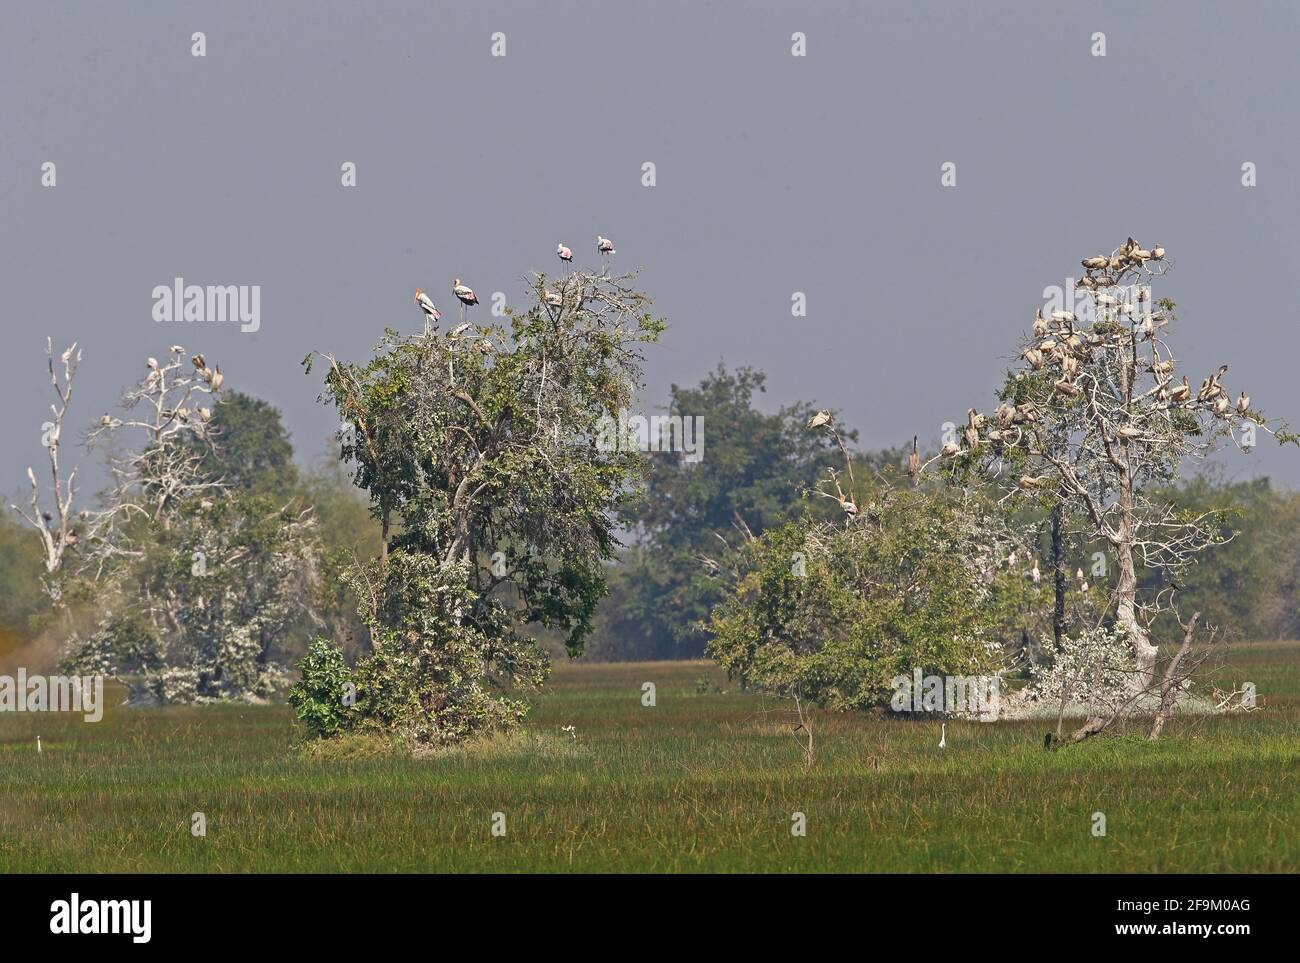 Spot-billed Pelican (Pelecanus philippensis) and Painted Stork (Mycteria leucocephala) tree roost in early evening Ang Trapaeng Thmor, Cambodia Stock Photo